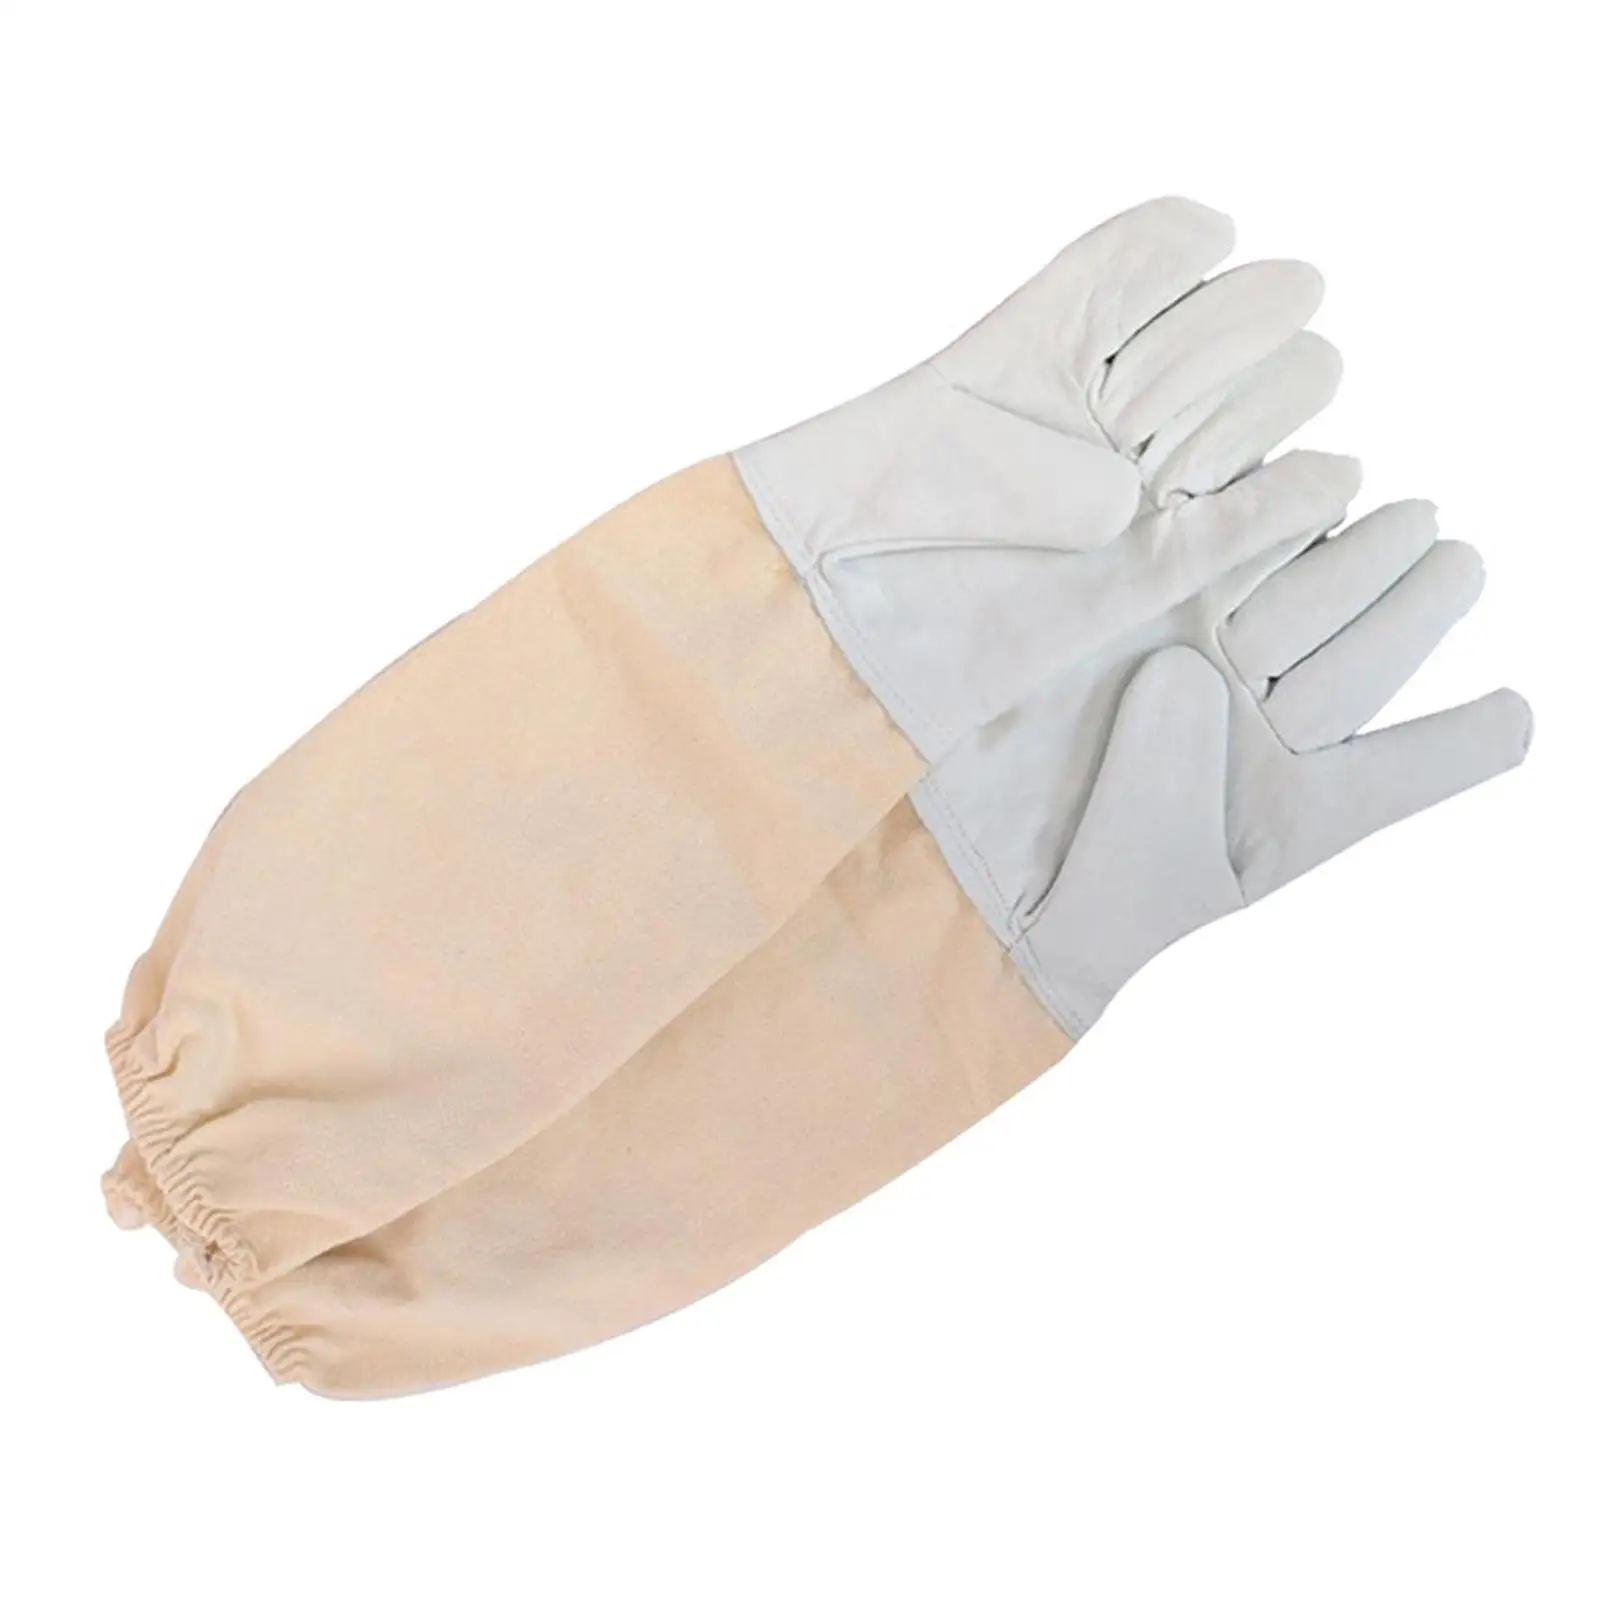 Beekeeping Gloves Anti Bee Gloves for Gardening Apiculture Tools Unisex